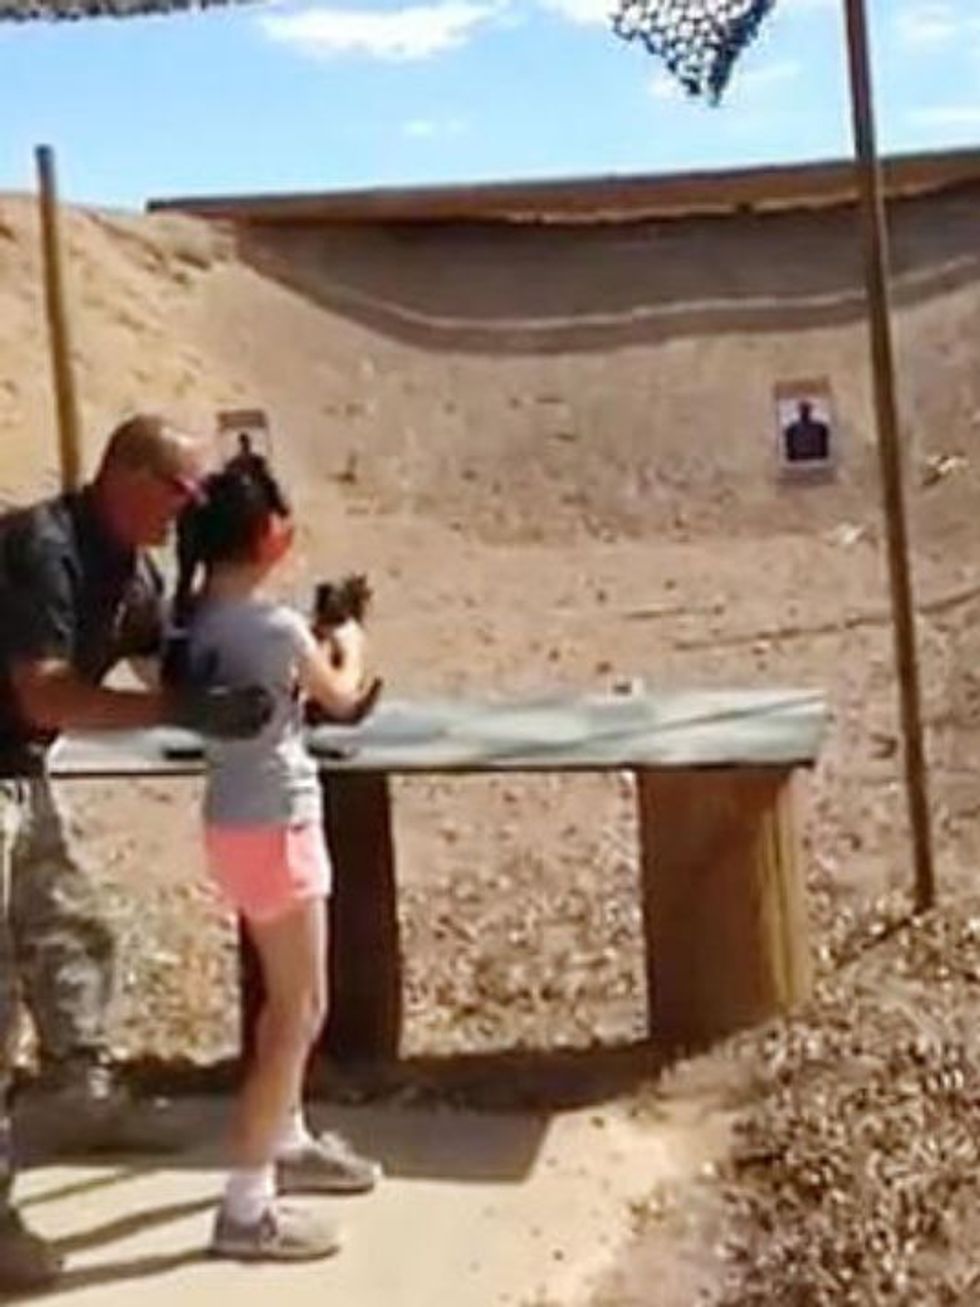 Arizona Not About To Take Away Kids' Rights To Accidentally Shoot People With Uzis